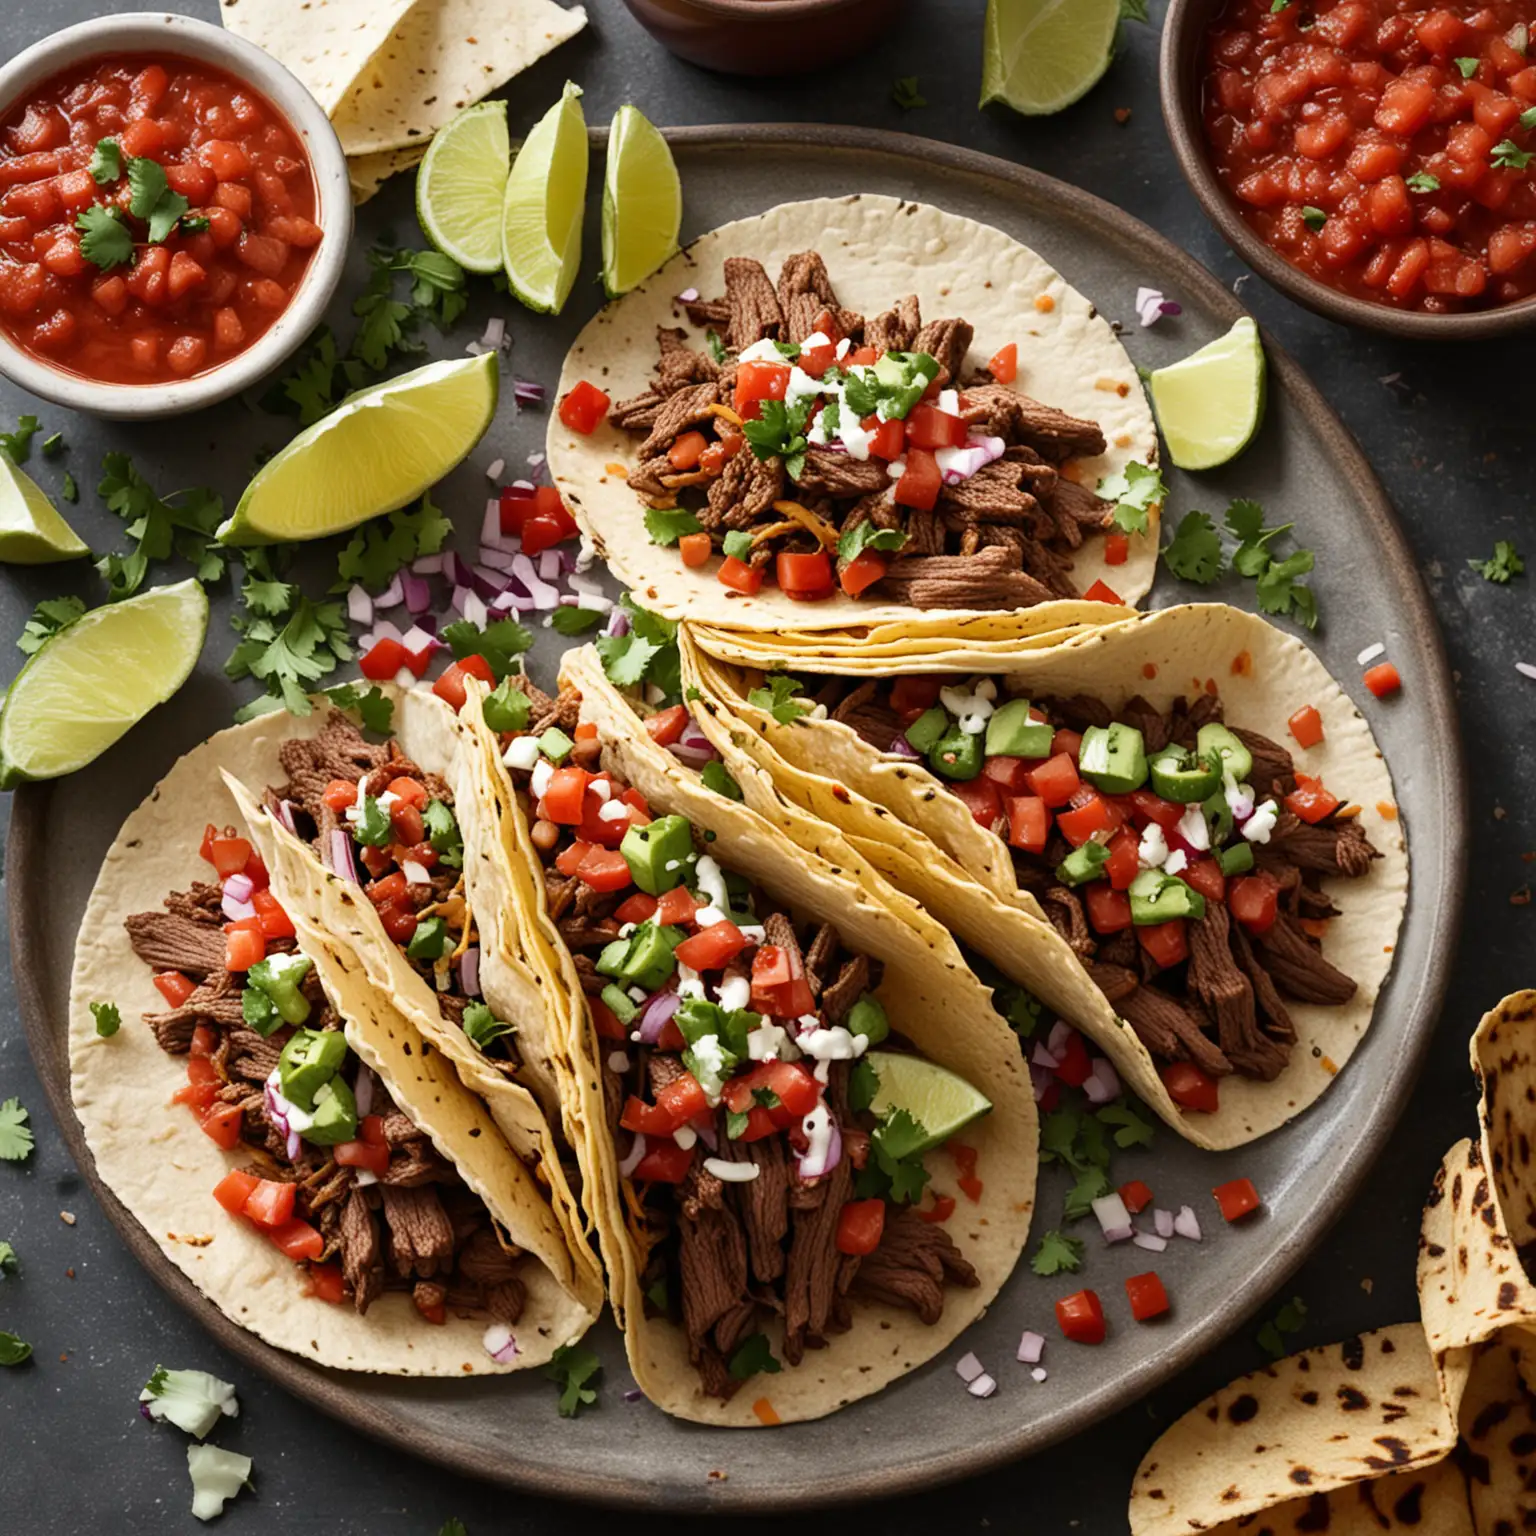 Savory Beef Tacos with Fresh Salsa Delicious Mexican Cuisine